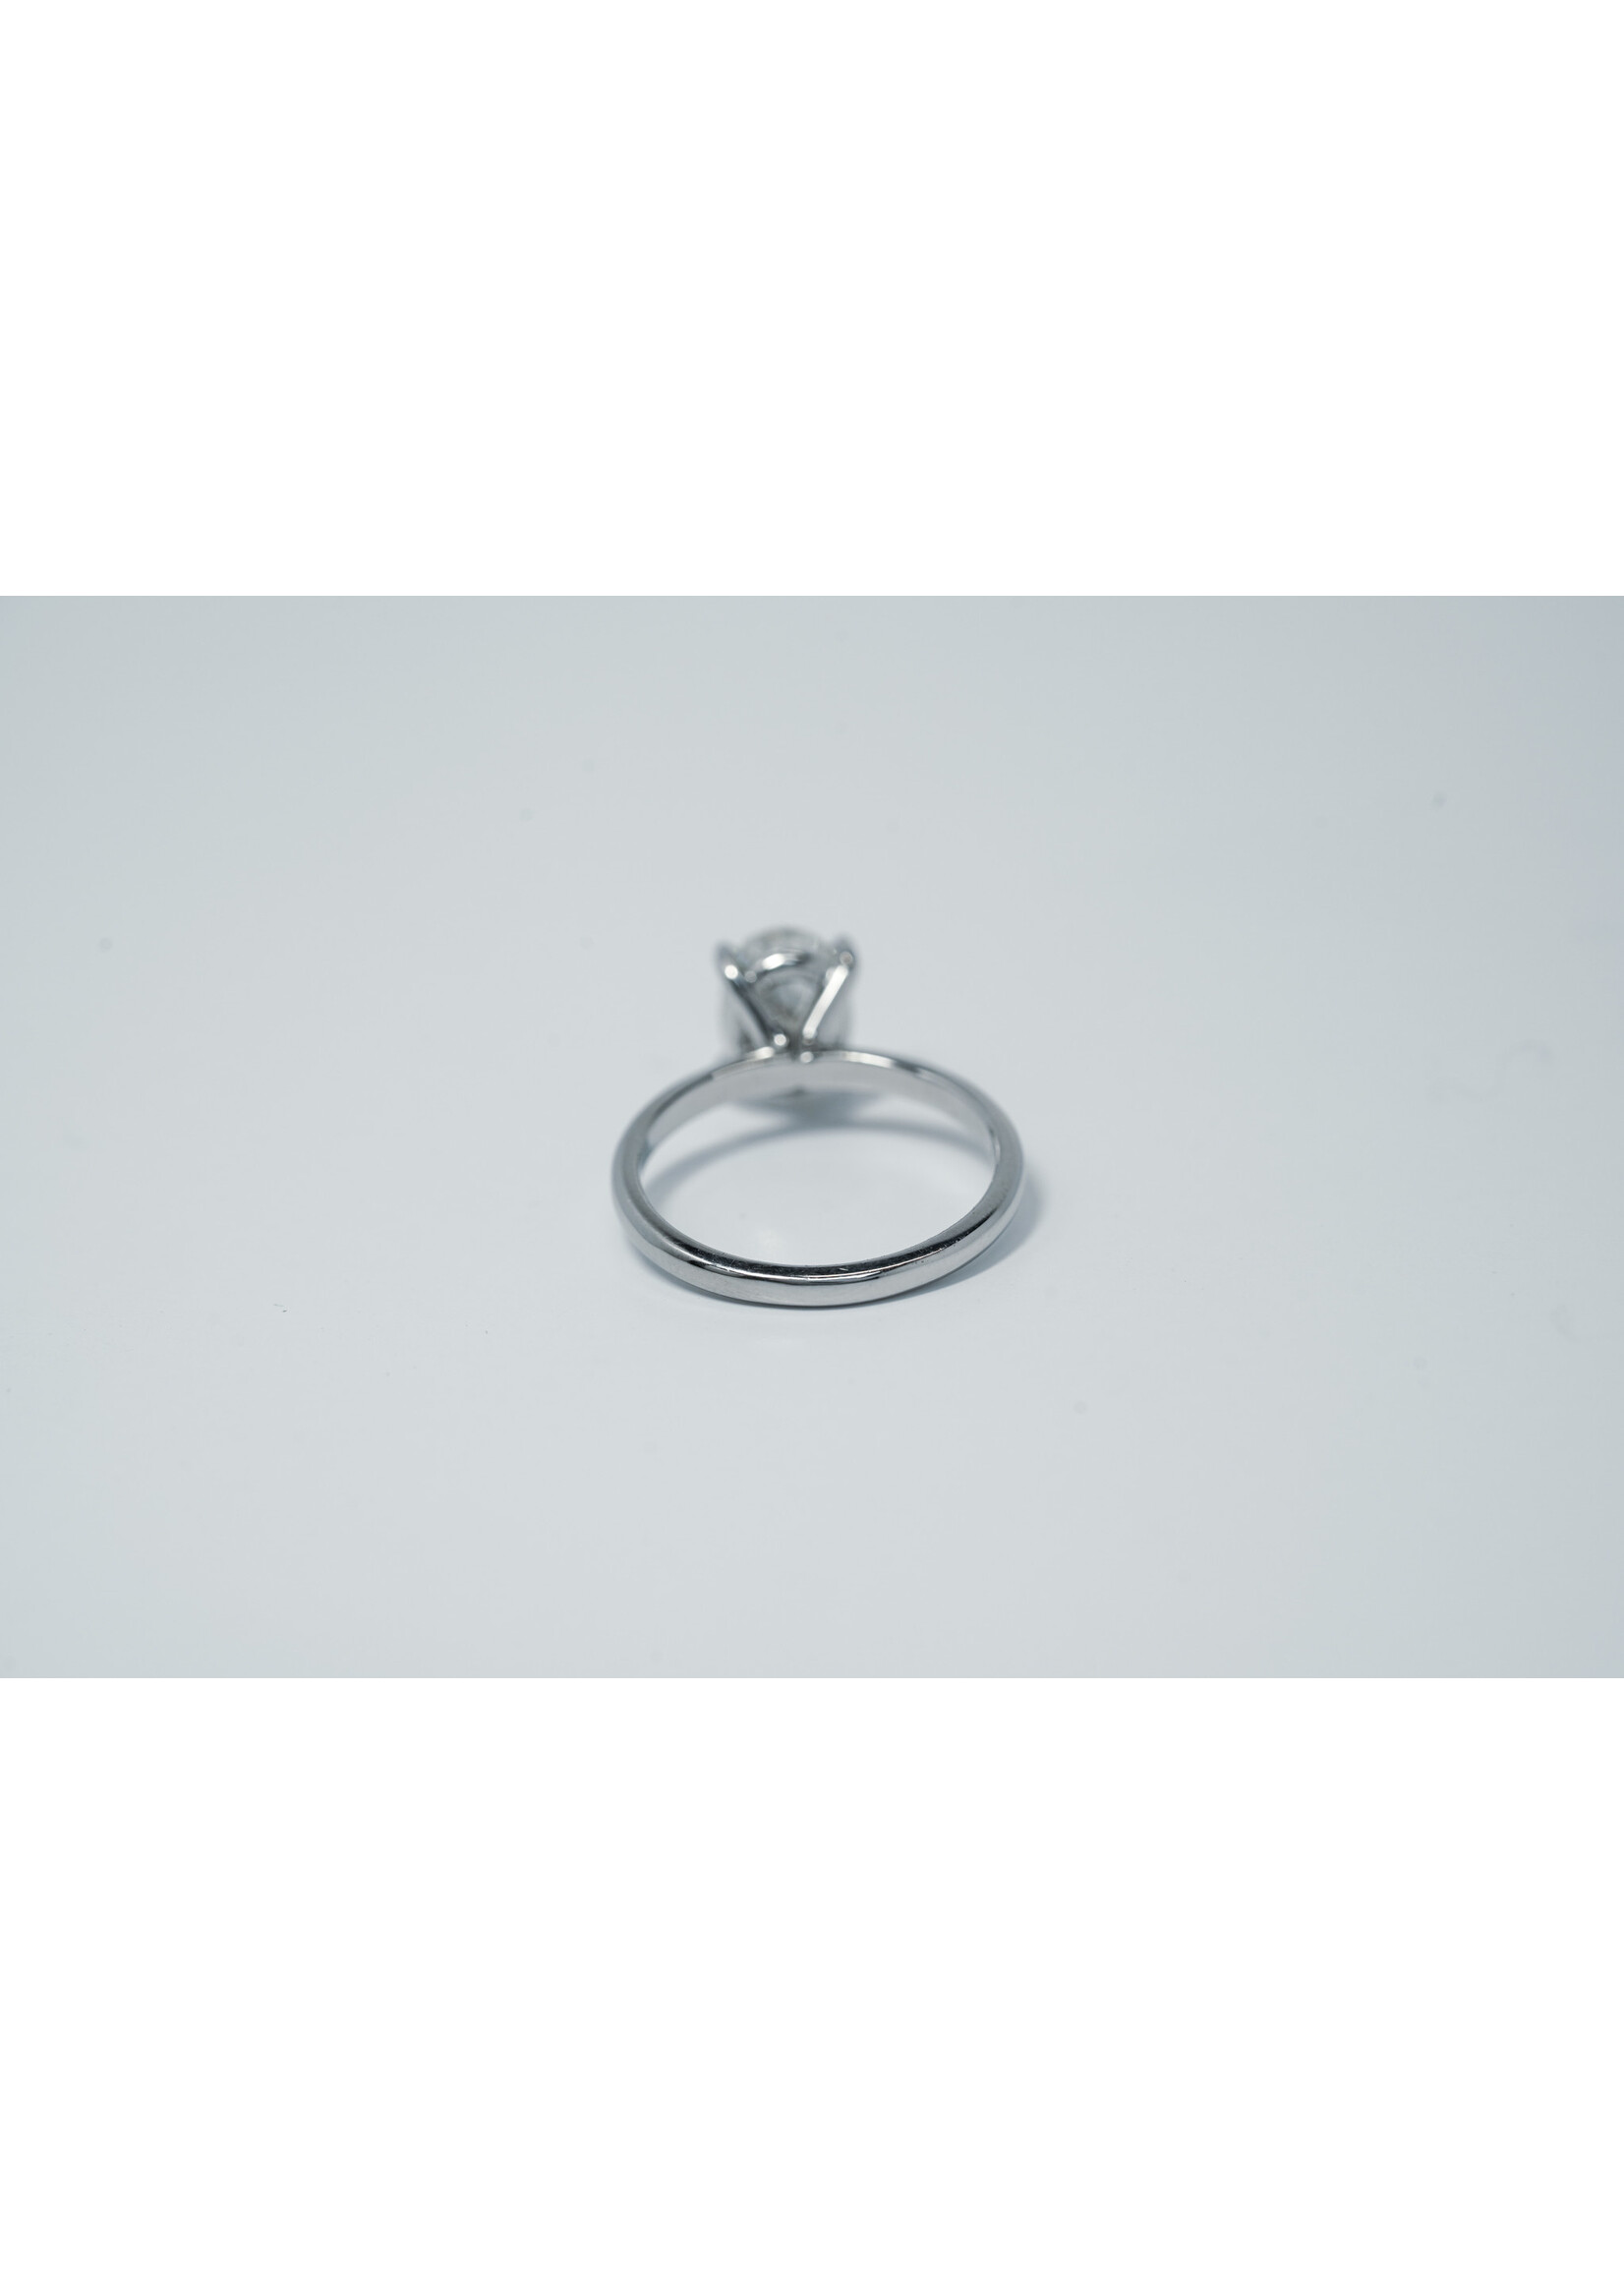 14KW 2.68g 2.01ct I/SI1 GIA Oval Solitaire Engagement Ring (size 7)